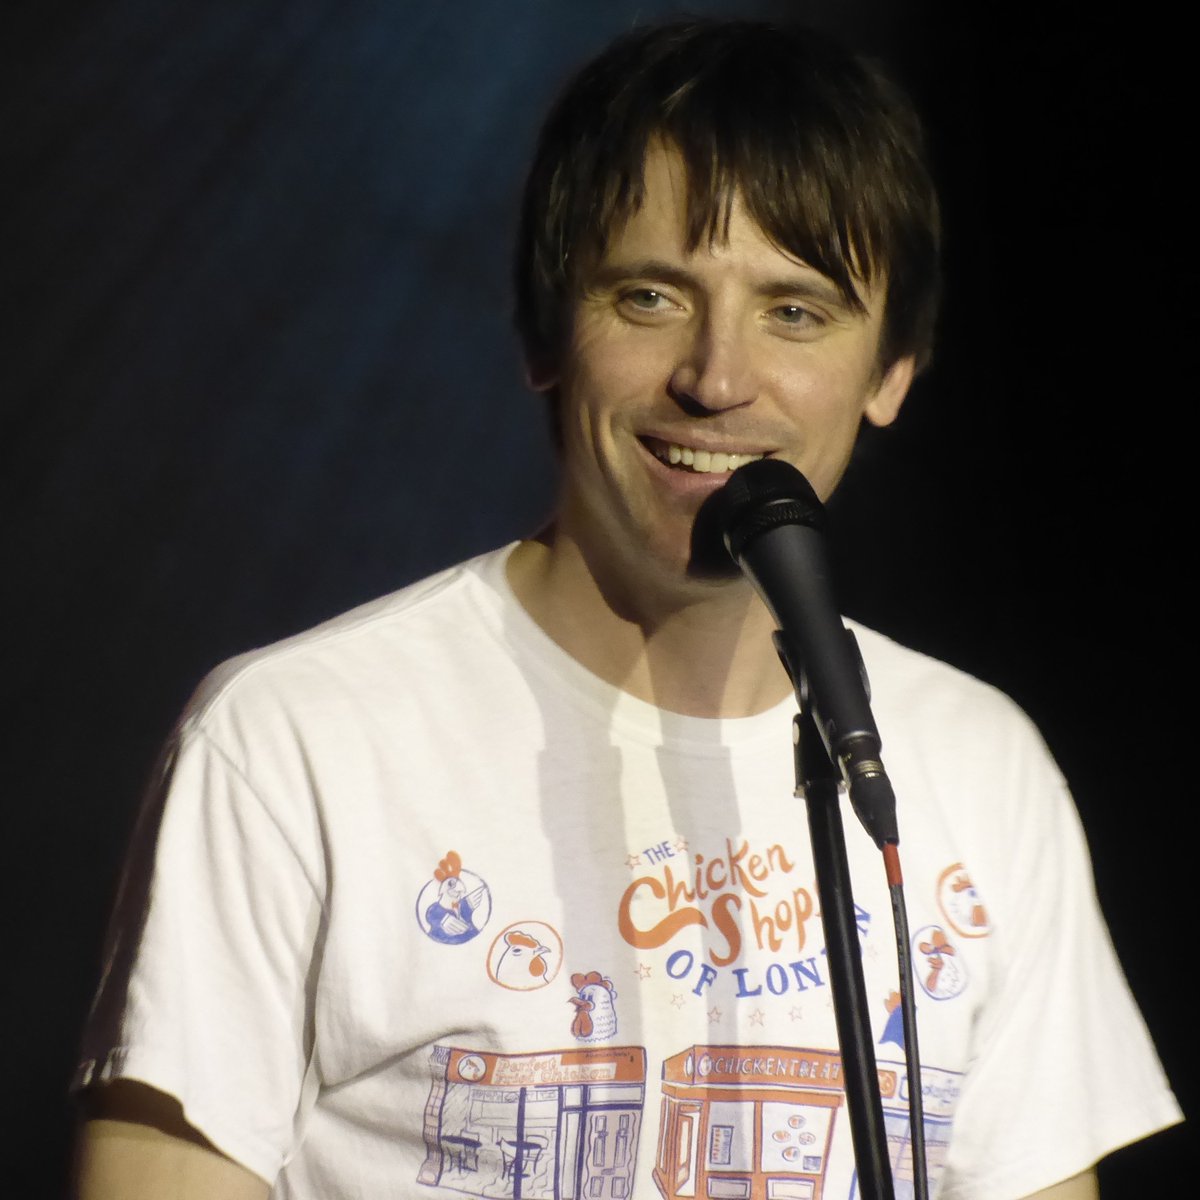 Why yes, you SHOULD come see @edpetrie gig for us this Autumn*, he's ever so good and so are our mixed-bill stand-up shows for ages 6+. Yes! * Wed October 25th, @CanterburyFest at @westgatehall Thur October 26th, Worthing @wtmworthing Sat December 9th, Staines @LastHopStaines